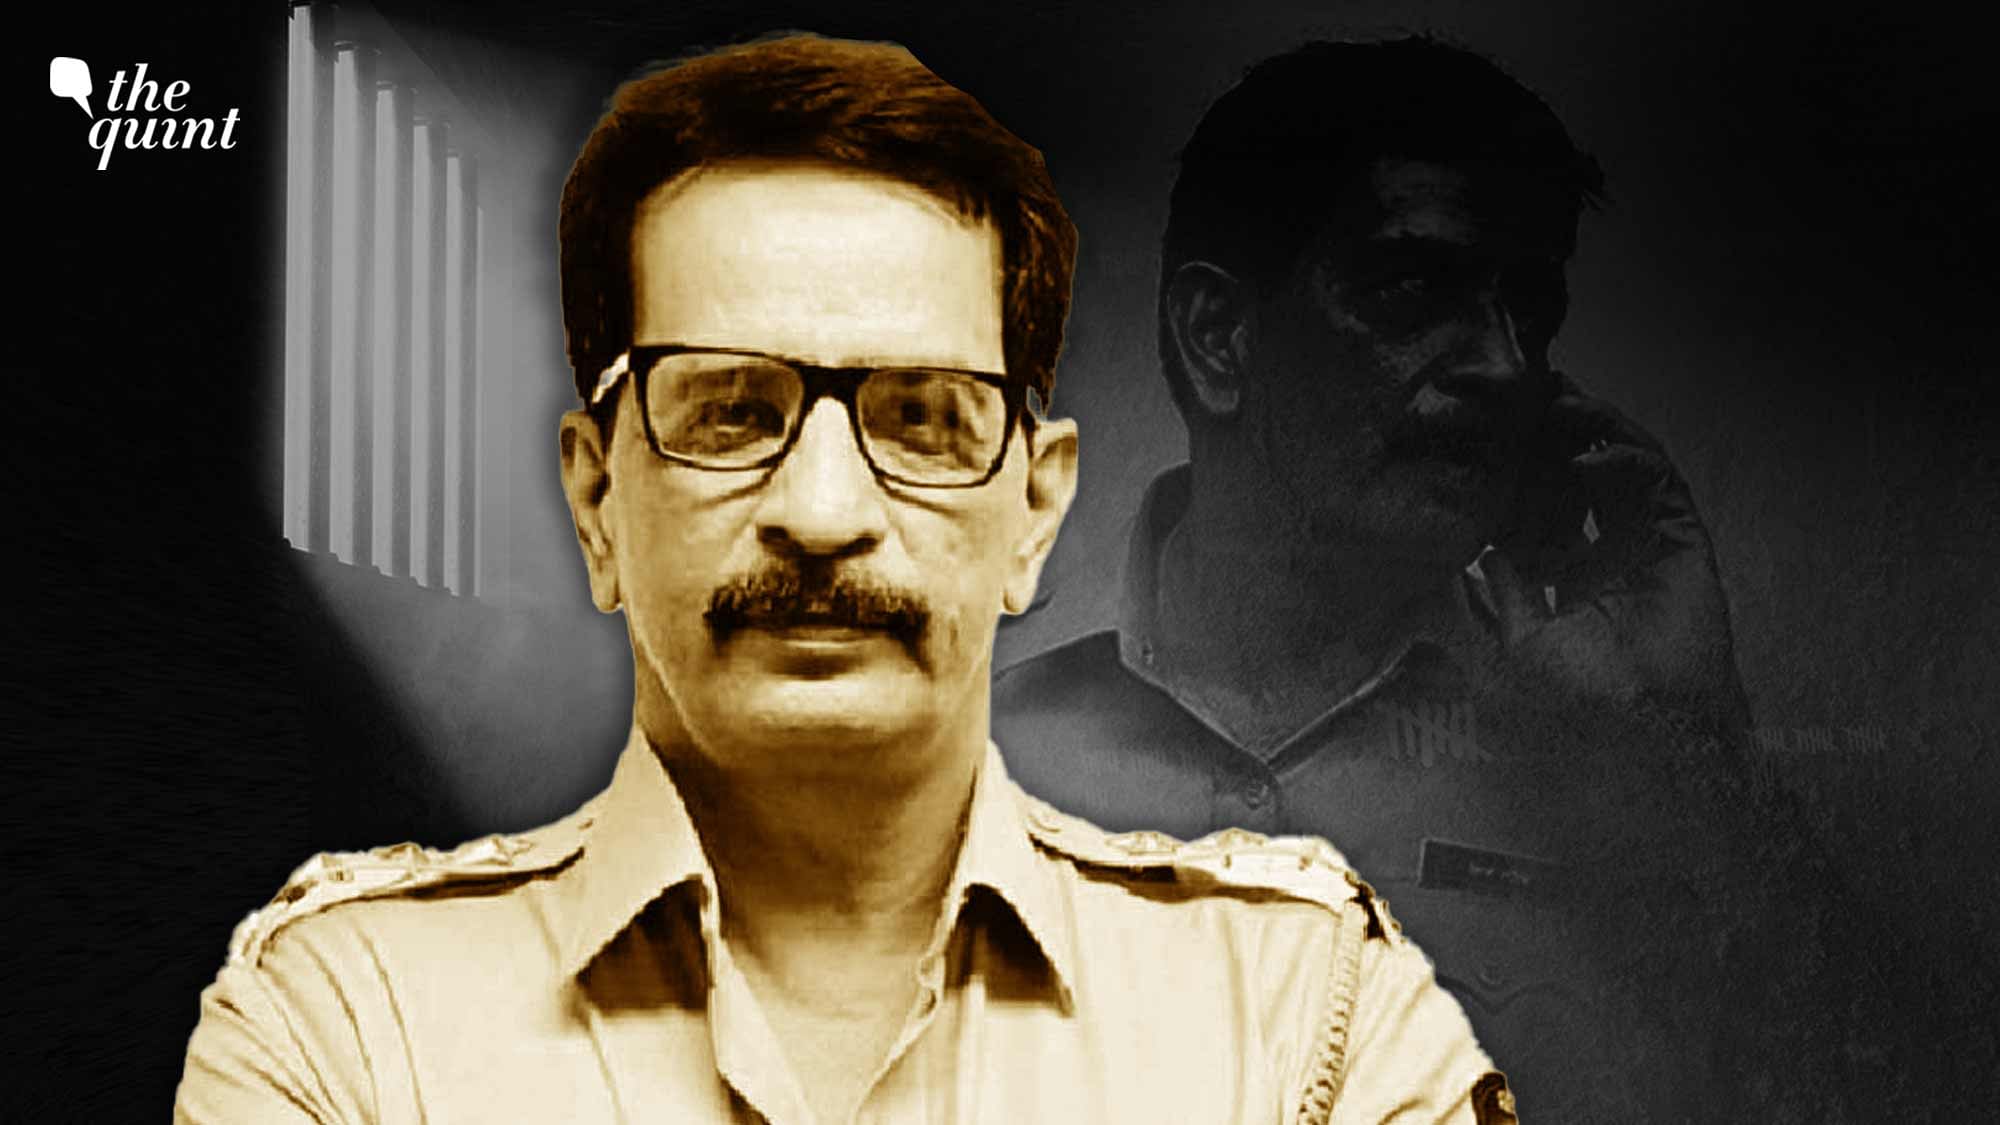 <div class="paragraphs"><p>Everybody knows the Pradeep Sharma story — 112 encounters, India’s deadliest cop, Mumbai’s Dirty Harry, featured by TIME magazine, immortalized by popular culture, and <ins><a href="https://content.time.com/time/subscriber/article/0,33009,404315,00.html" rel="noreferrer noopener">king of one-liners</a></ins> like, “Criminals are filth. And I’m the cleaner.”</p></div>